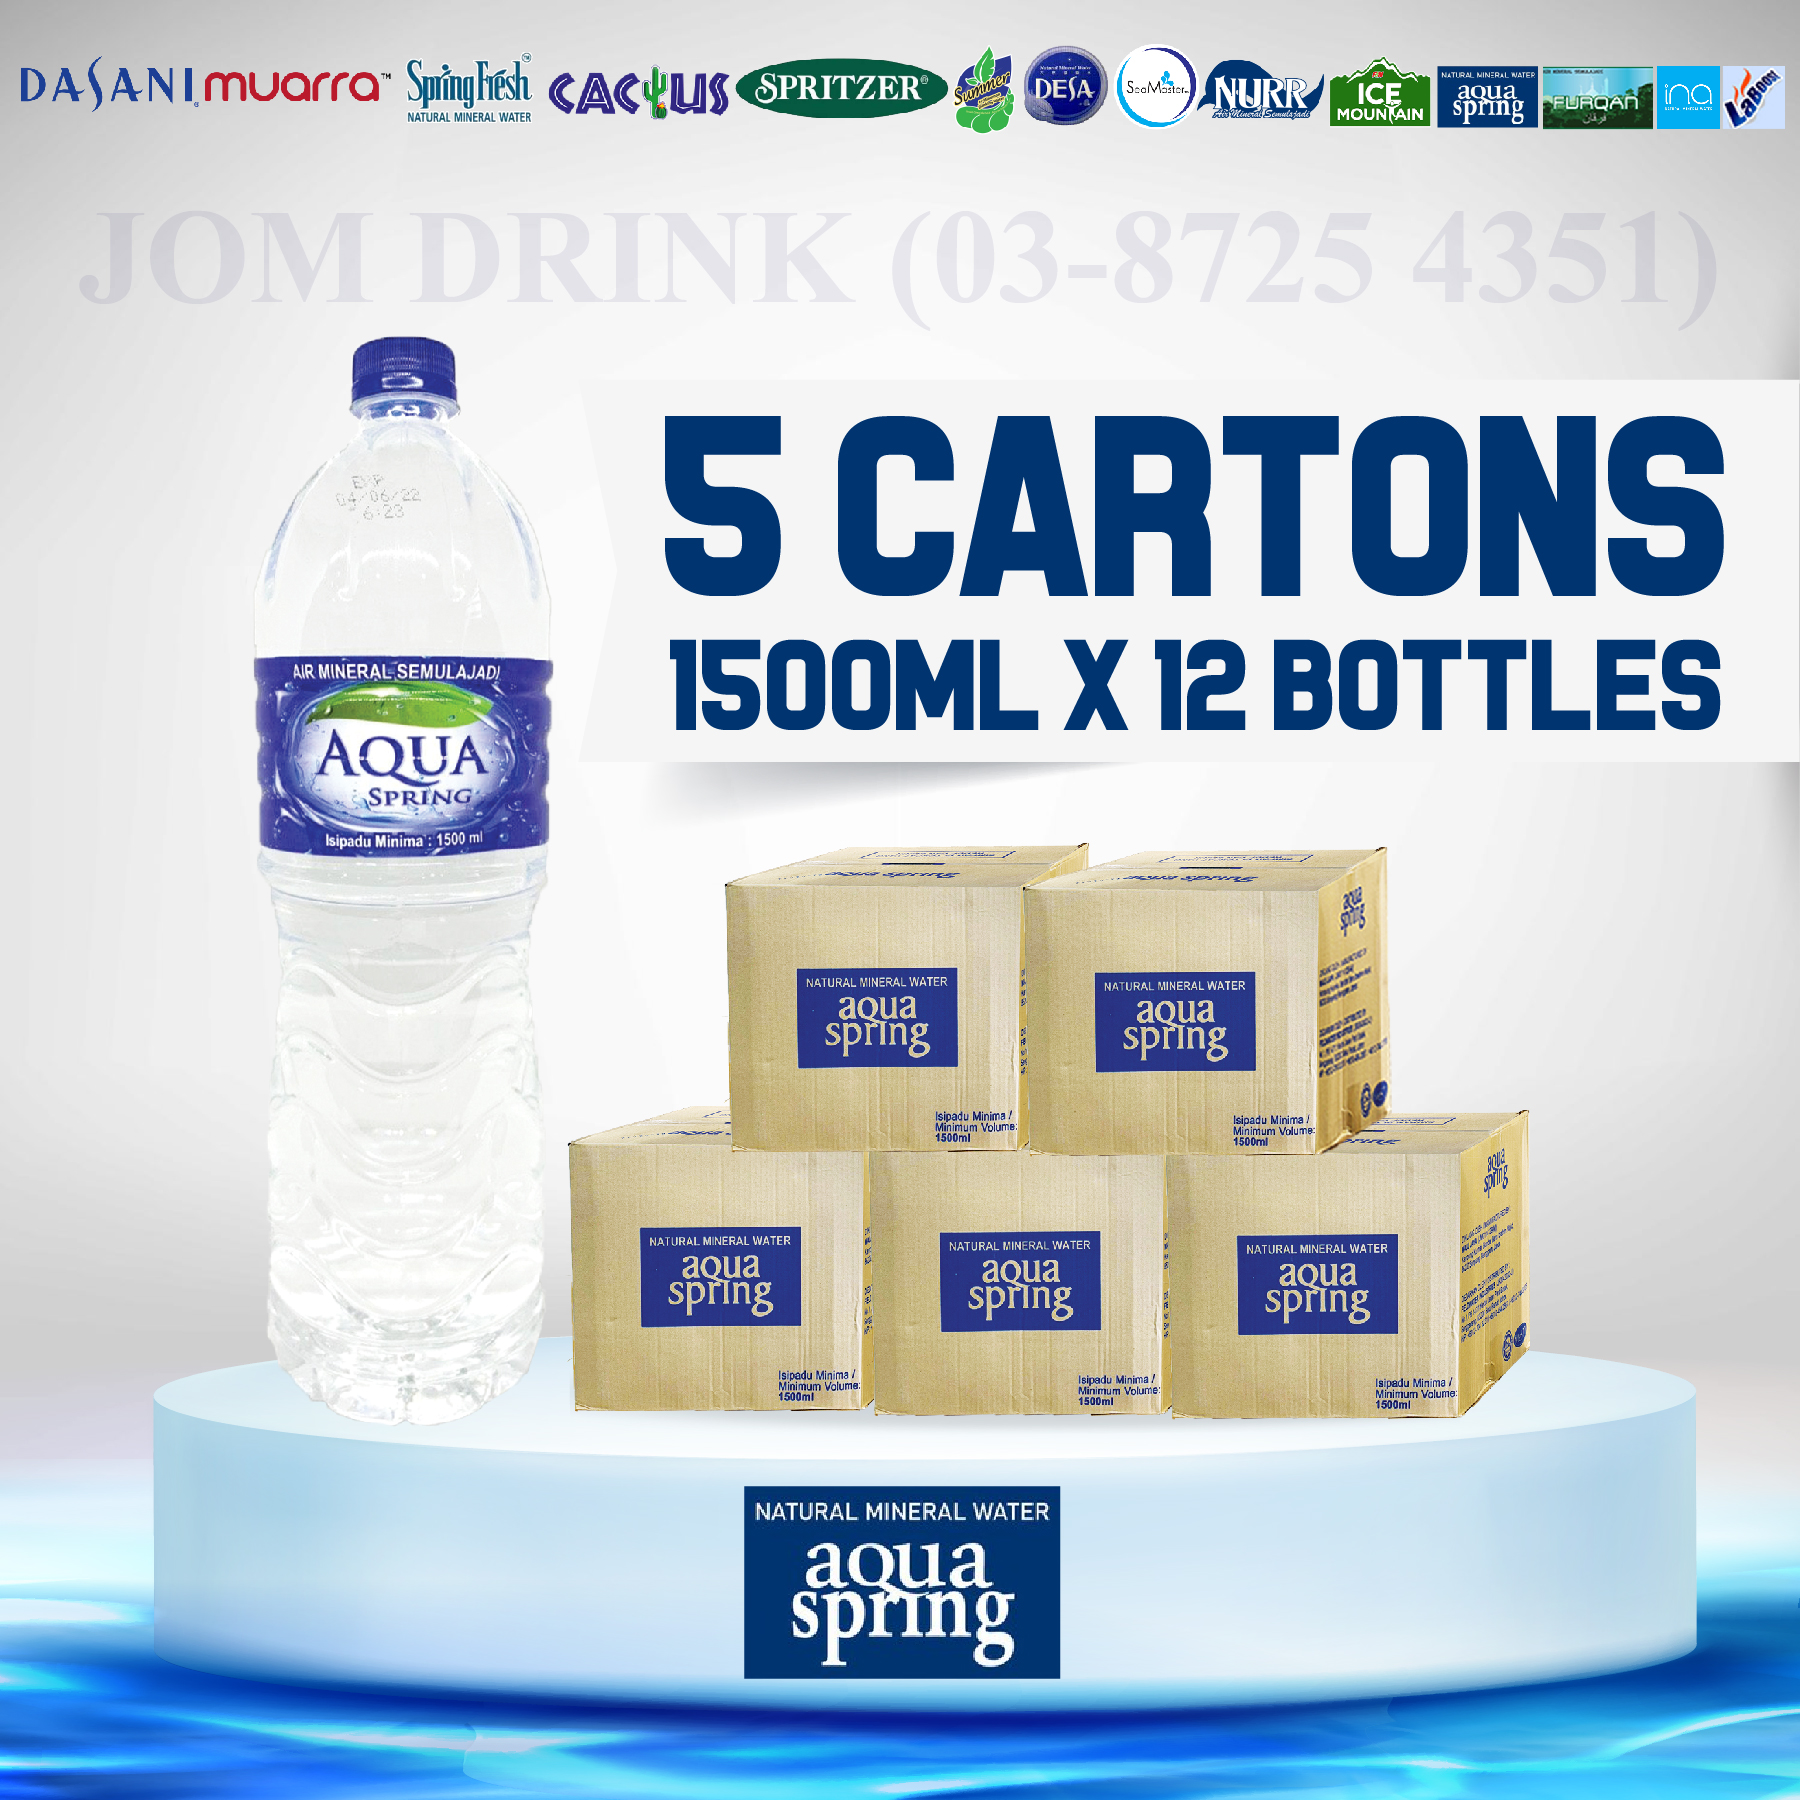 PACKAGES OF 5 BOXES : AQUA SPRINGS MINERAL WATER 1500ML